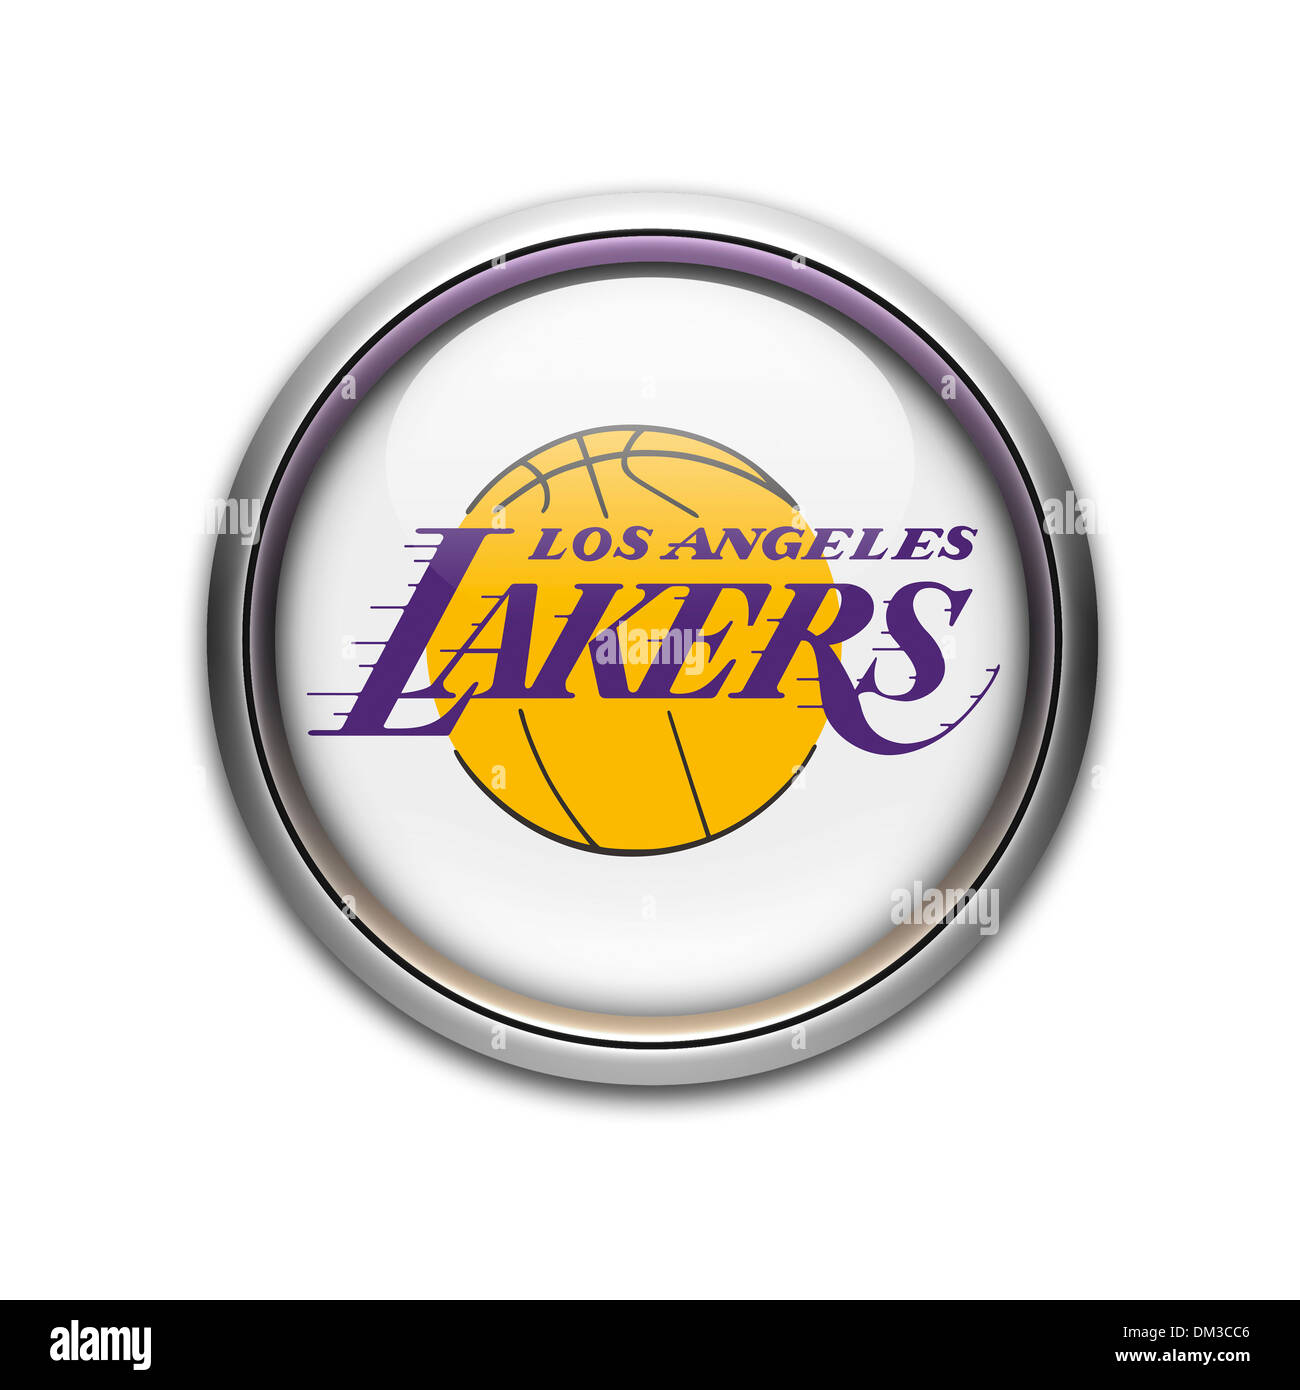 lakers icon